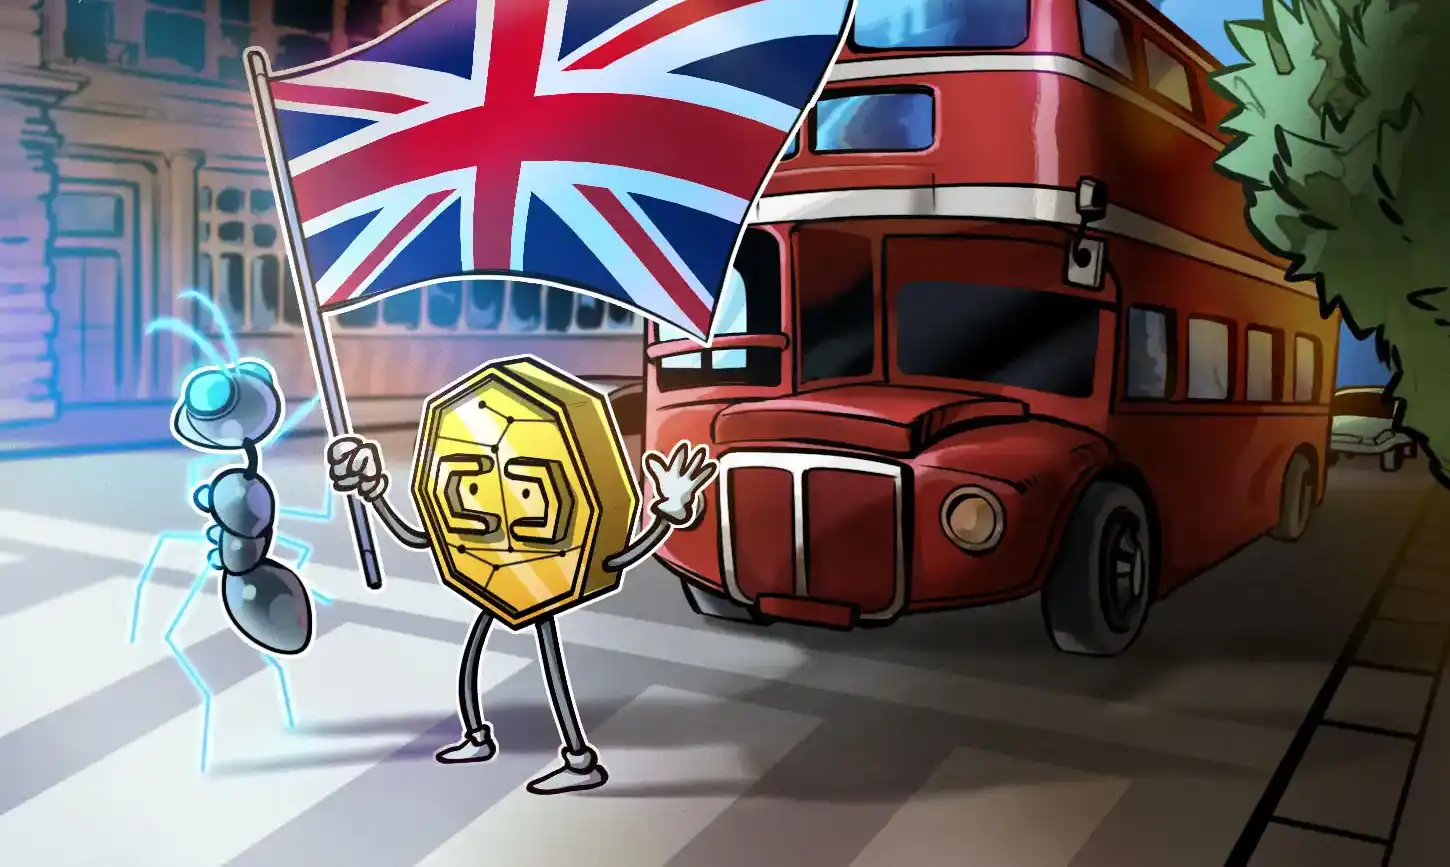 UK's Coordinated Regulatory Approach for Cryptocurrencies and Stablecoins